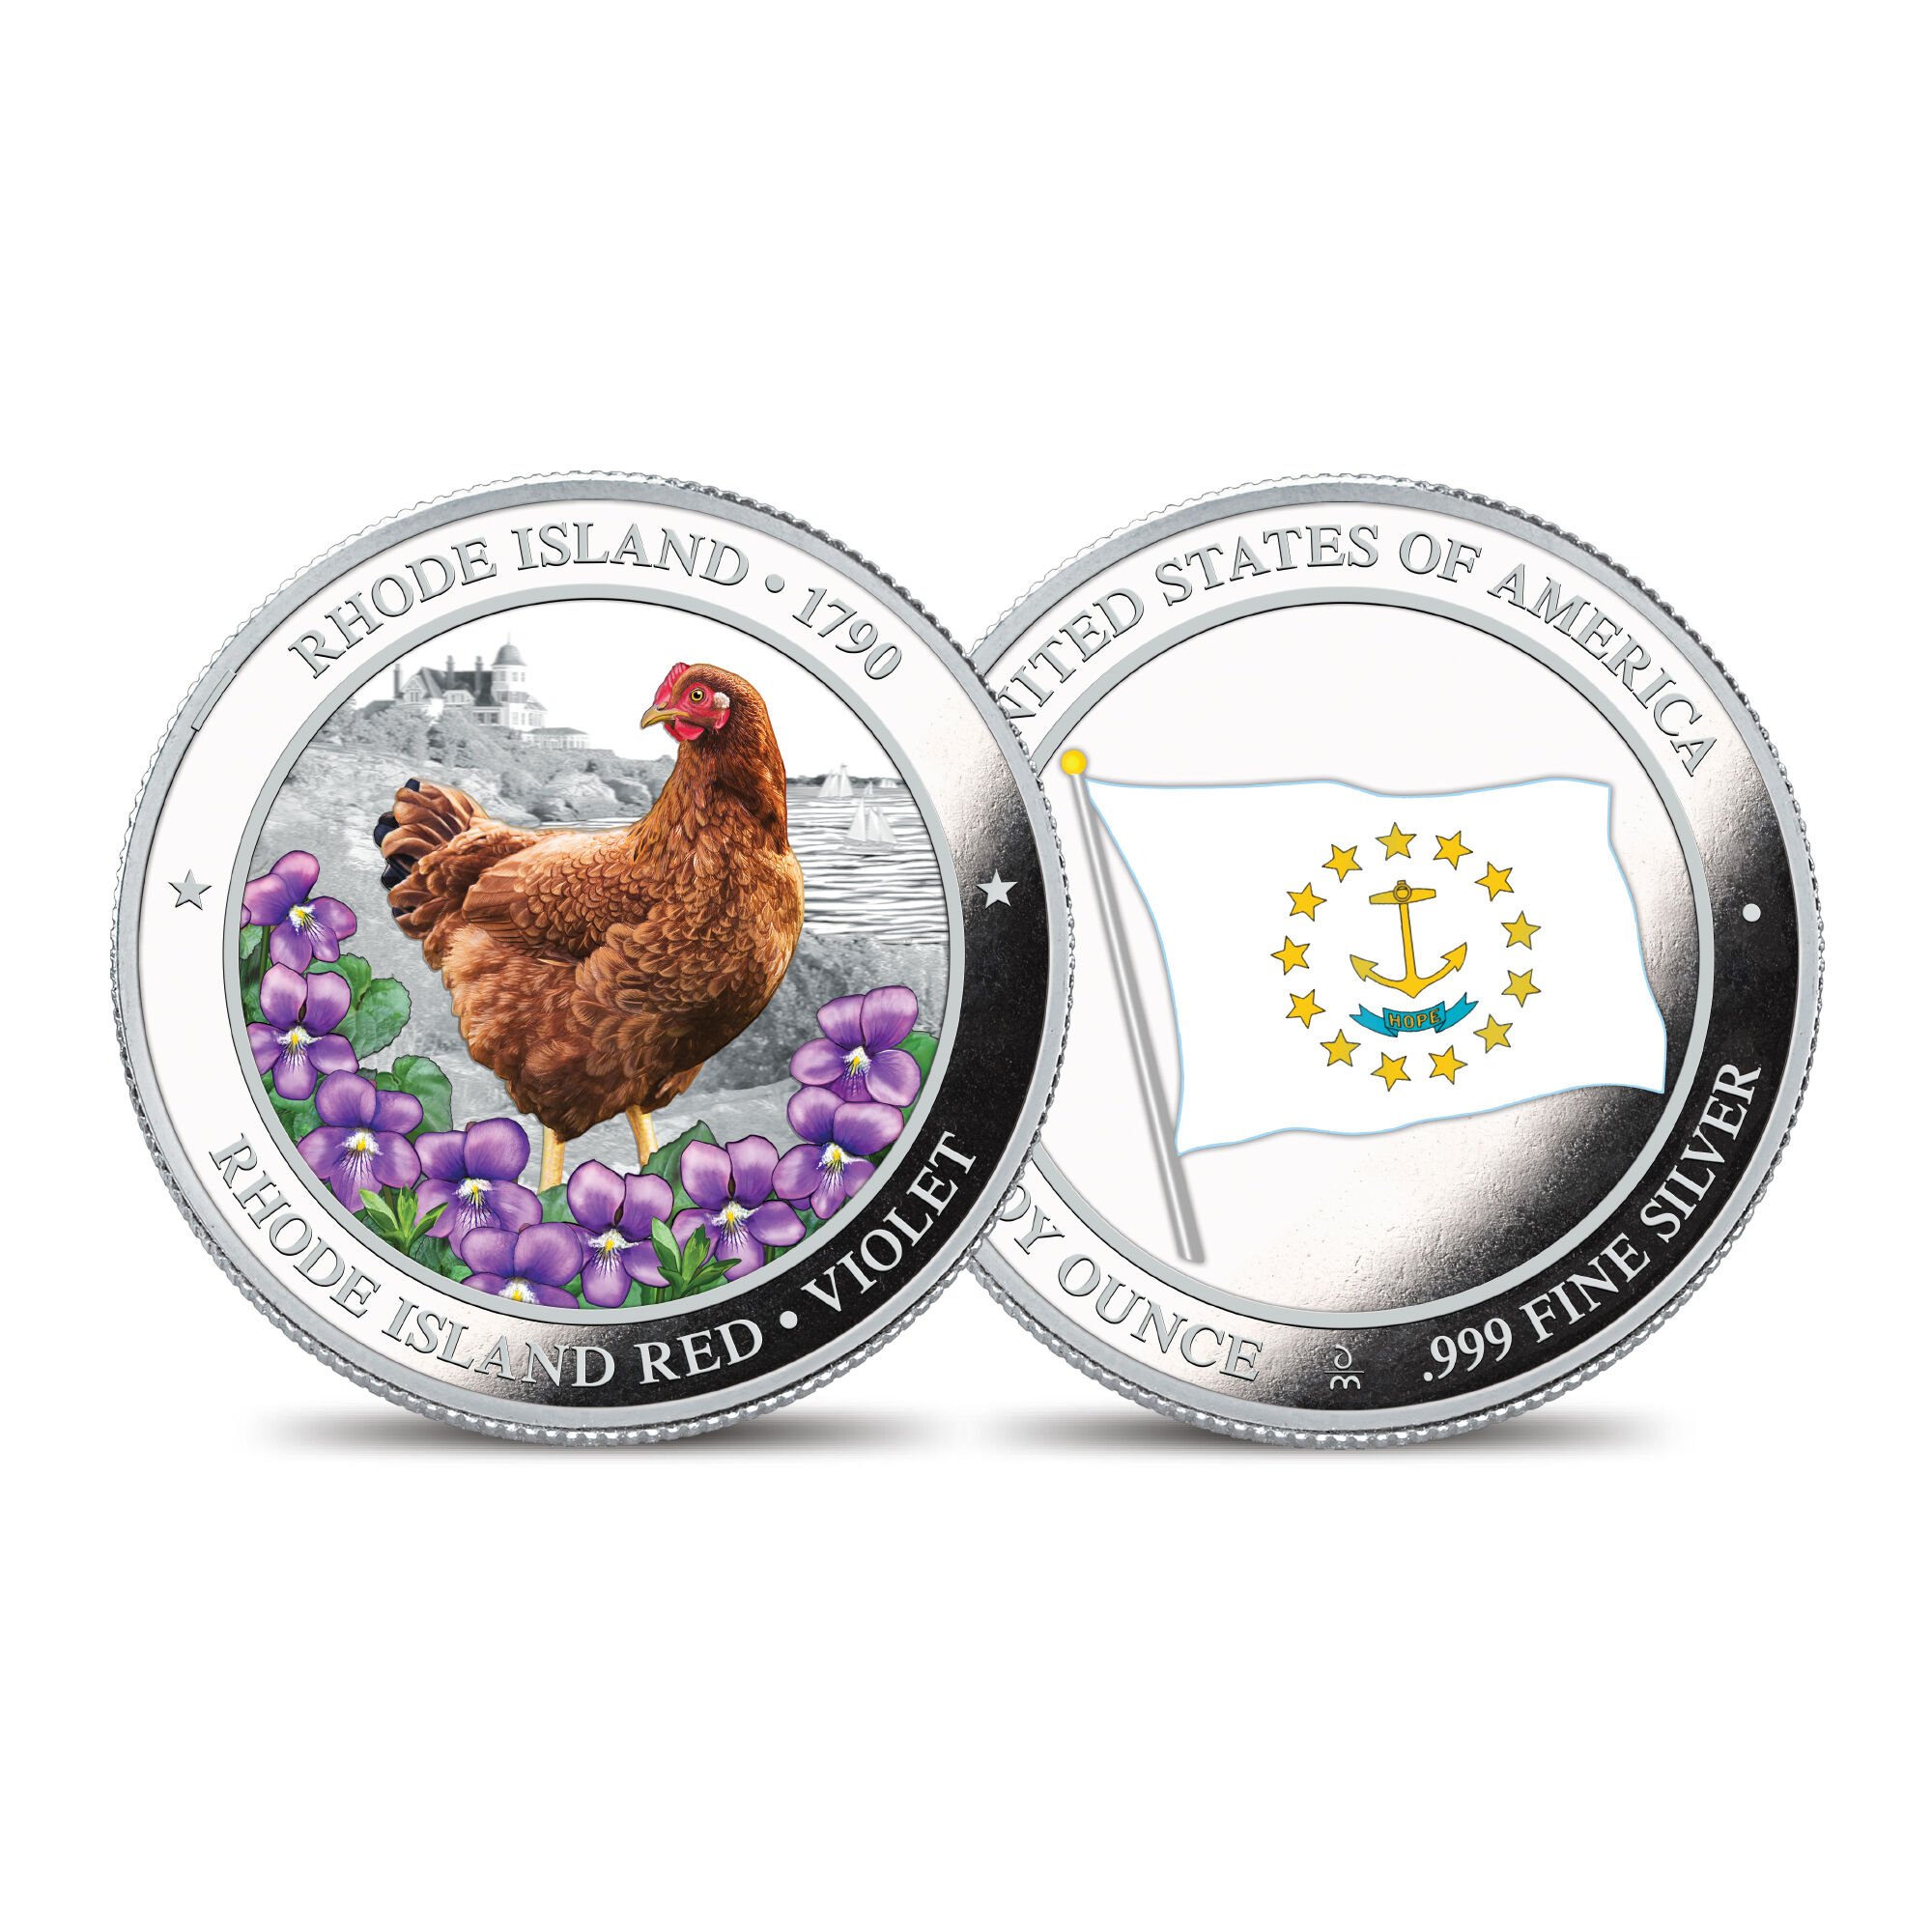 The State Bird and Flower Silver Commemoratives 2167 0088 a commemorativeRI